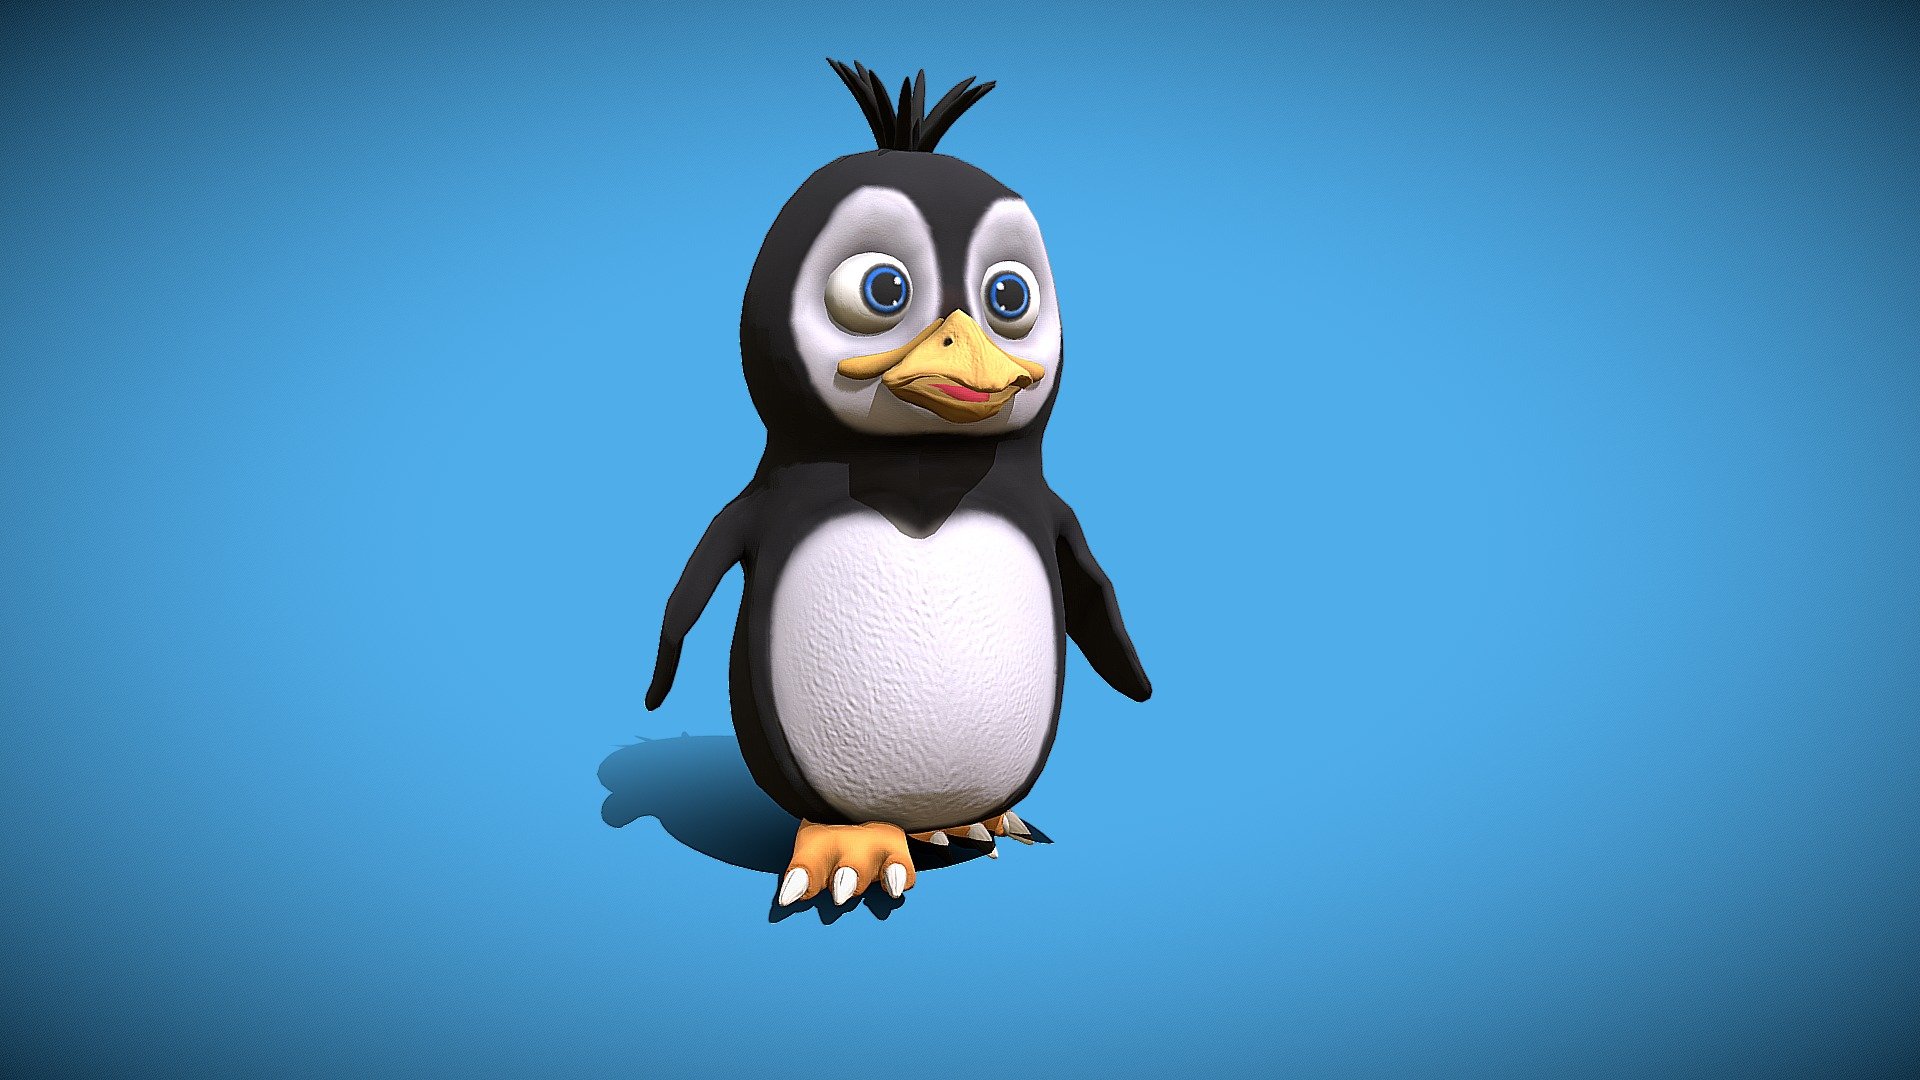 Cartoon Penguin

Features

-Model is completly unwrapped
-Layered scene (RIgg, mesh, lights, BG, controls)
-Lowpoly model
-Optimal Vray settings 
-Morpher expresions
-No need any plugin to open scene
-All nodes are named clearly
-Clean topology based on quads.
-One mesh
-Hand painted model

File format

-3Ds Max 2015 (Vray 3.0.0)
-3Ds Max 2012 (Vray 3.0.0)
-Obj 2015
-3Ds 2015
-FBX (contains body skeleton and morpher expressions) 3Ds Max

Textures

-Body texture res is 4k
-PNG format

Rigging

-Rigging inside 3Ds Max by Skin modifier, used CAT skeleton
-Handly rigged with vertex weight and painting for better movements
-Scene also include idle and walk animation

Lights and Render setting are included in the 3DS Max scene (V-ray). Just open and render
Scene also include Walk animation, folder FBX format whitch can be used on another 3D software or games engines.

I hope u like it!
For more models just click on my name and browse library 3d model